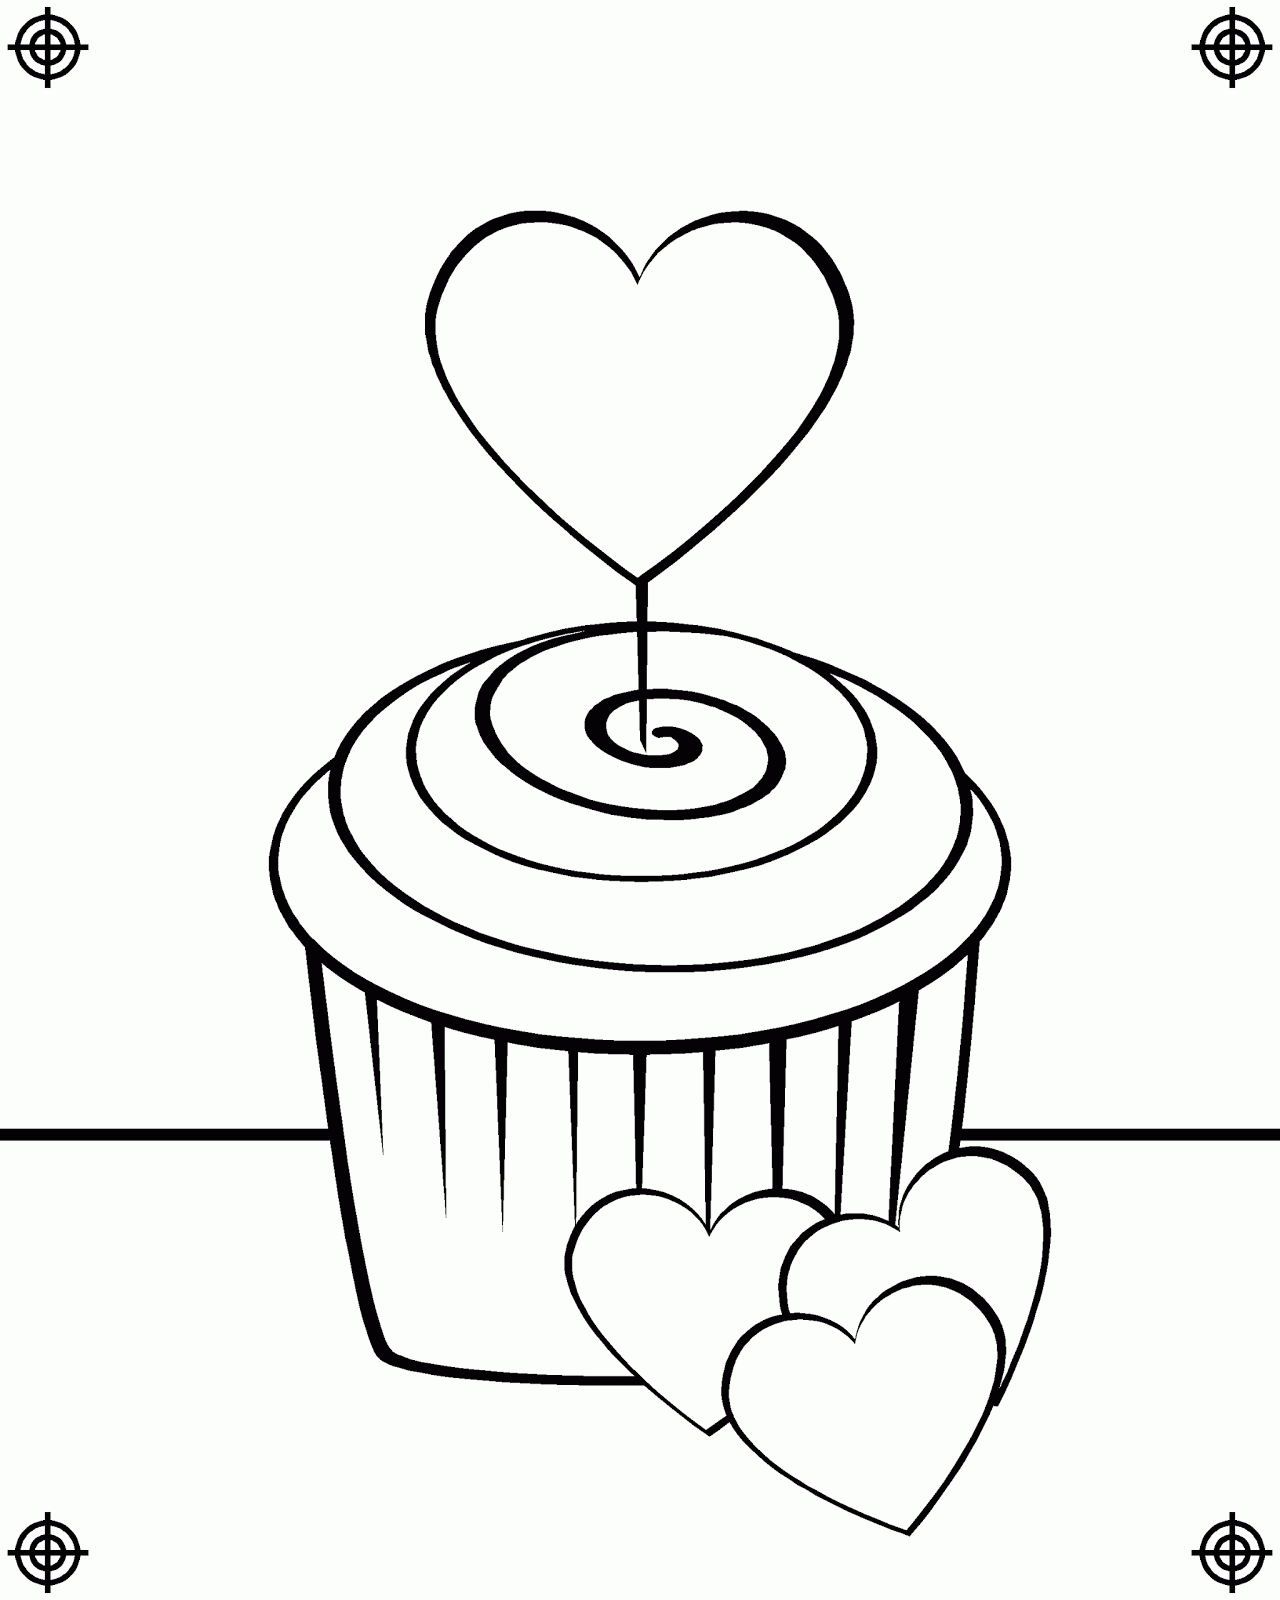 Cute Cupcakes Coloring Pages - Coloring Home